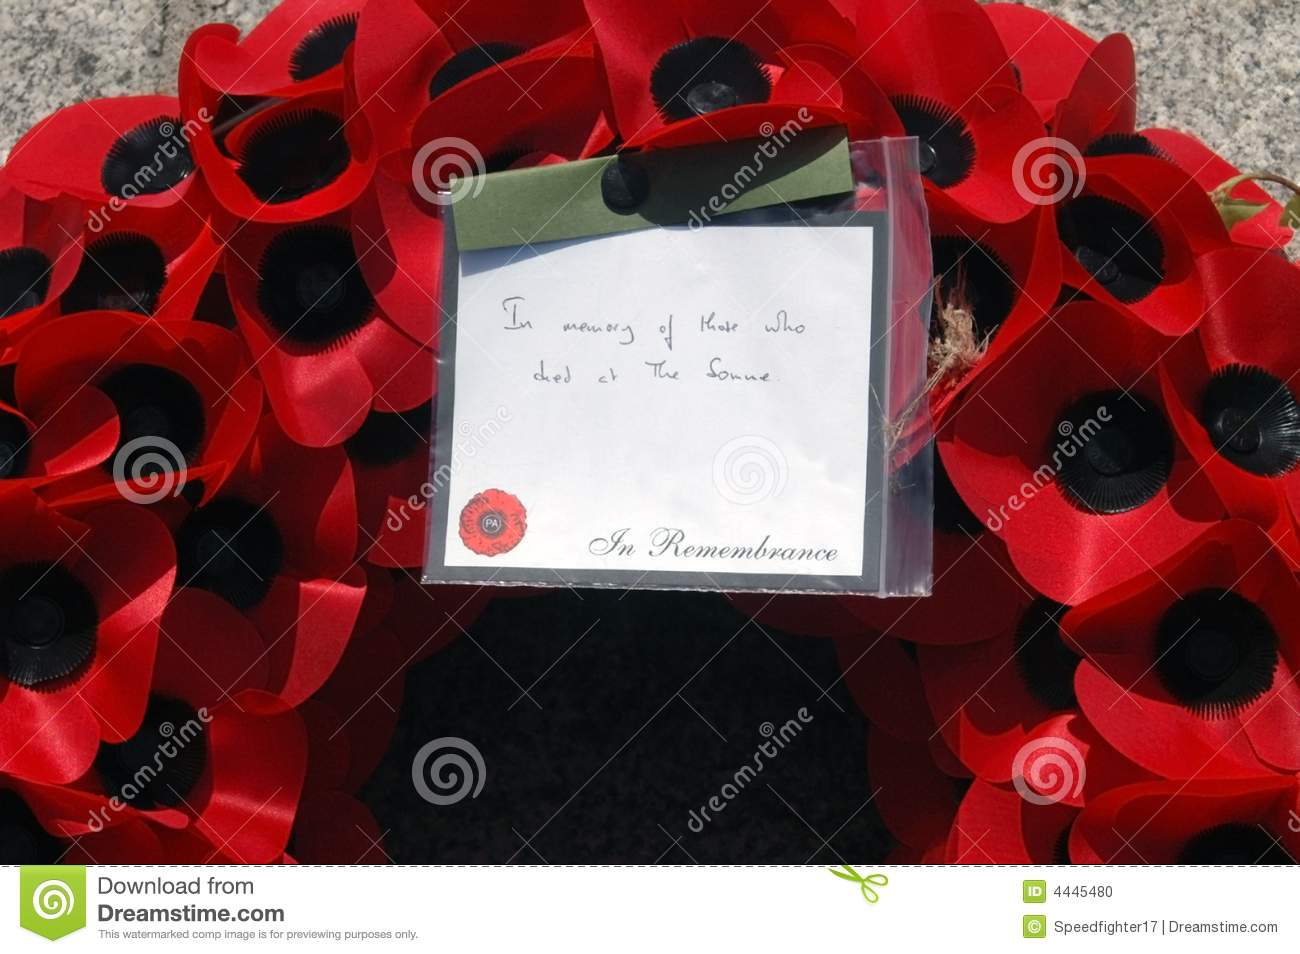 Remembrance Day Poppy Wreath In Remembrance Of Those Who Died At The